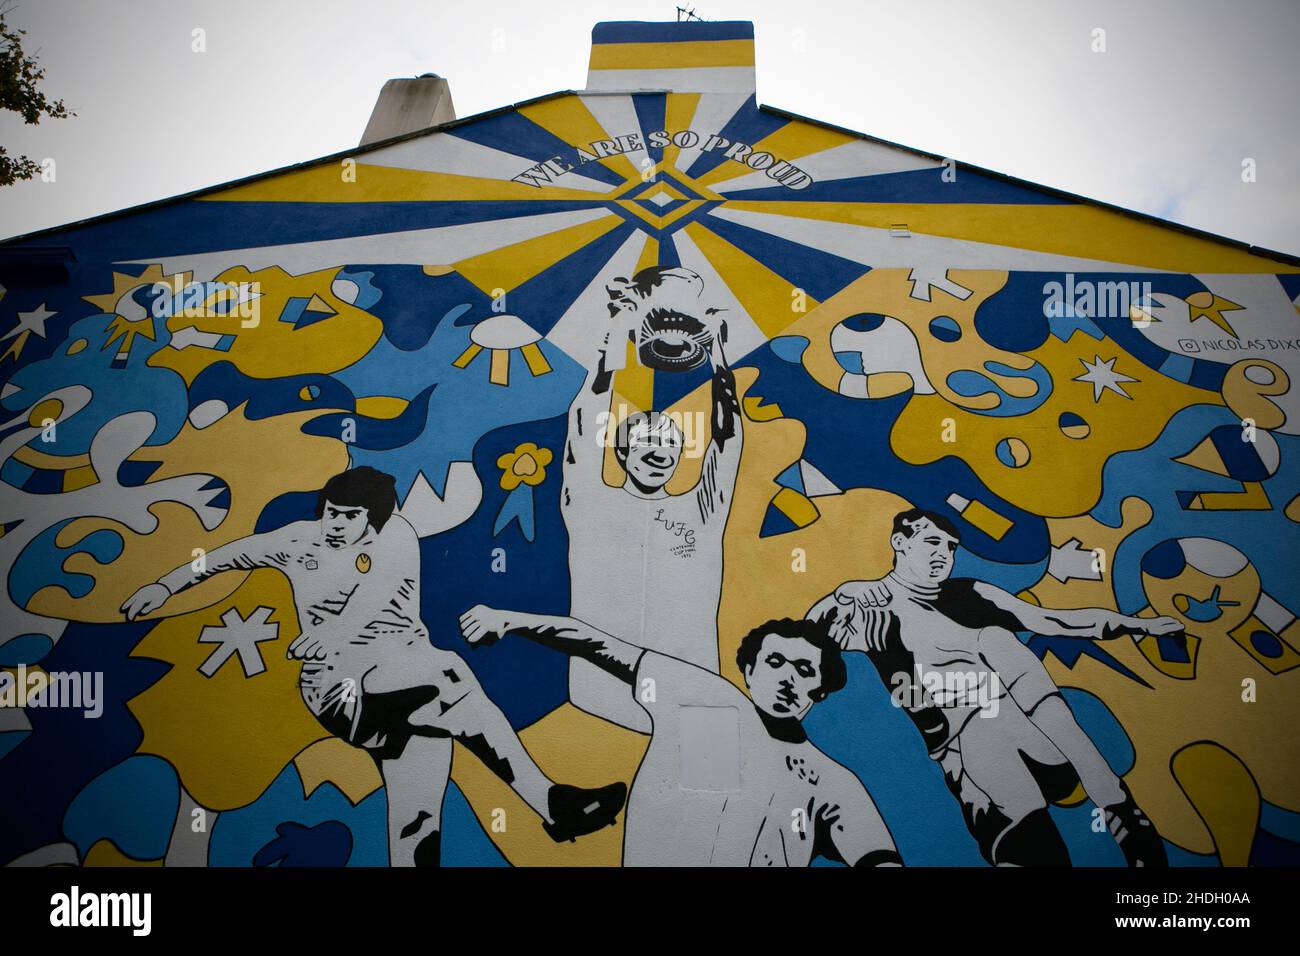 A football painted mural on the side of a house in Pudsey,west Yorkshire showing former Leeds United players including Jack Charlton on the side of a Stock Photo